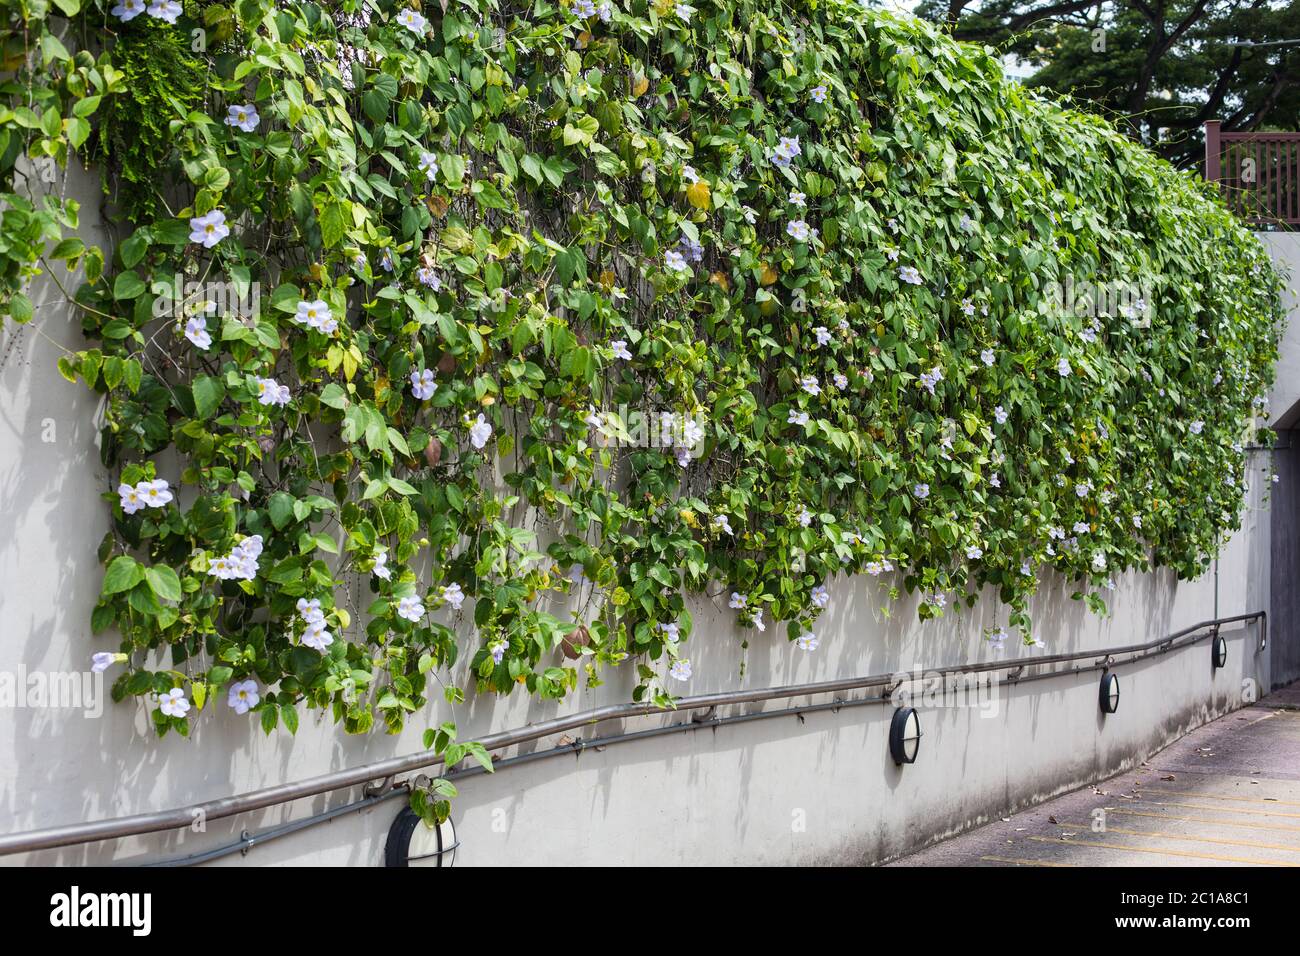 Vertical greenery along the park connector network in Singapore. Stock Photo